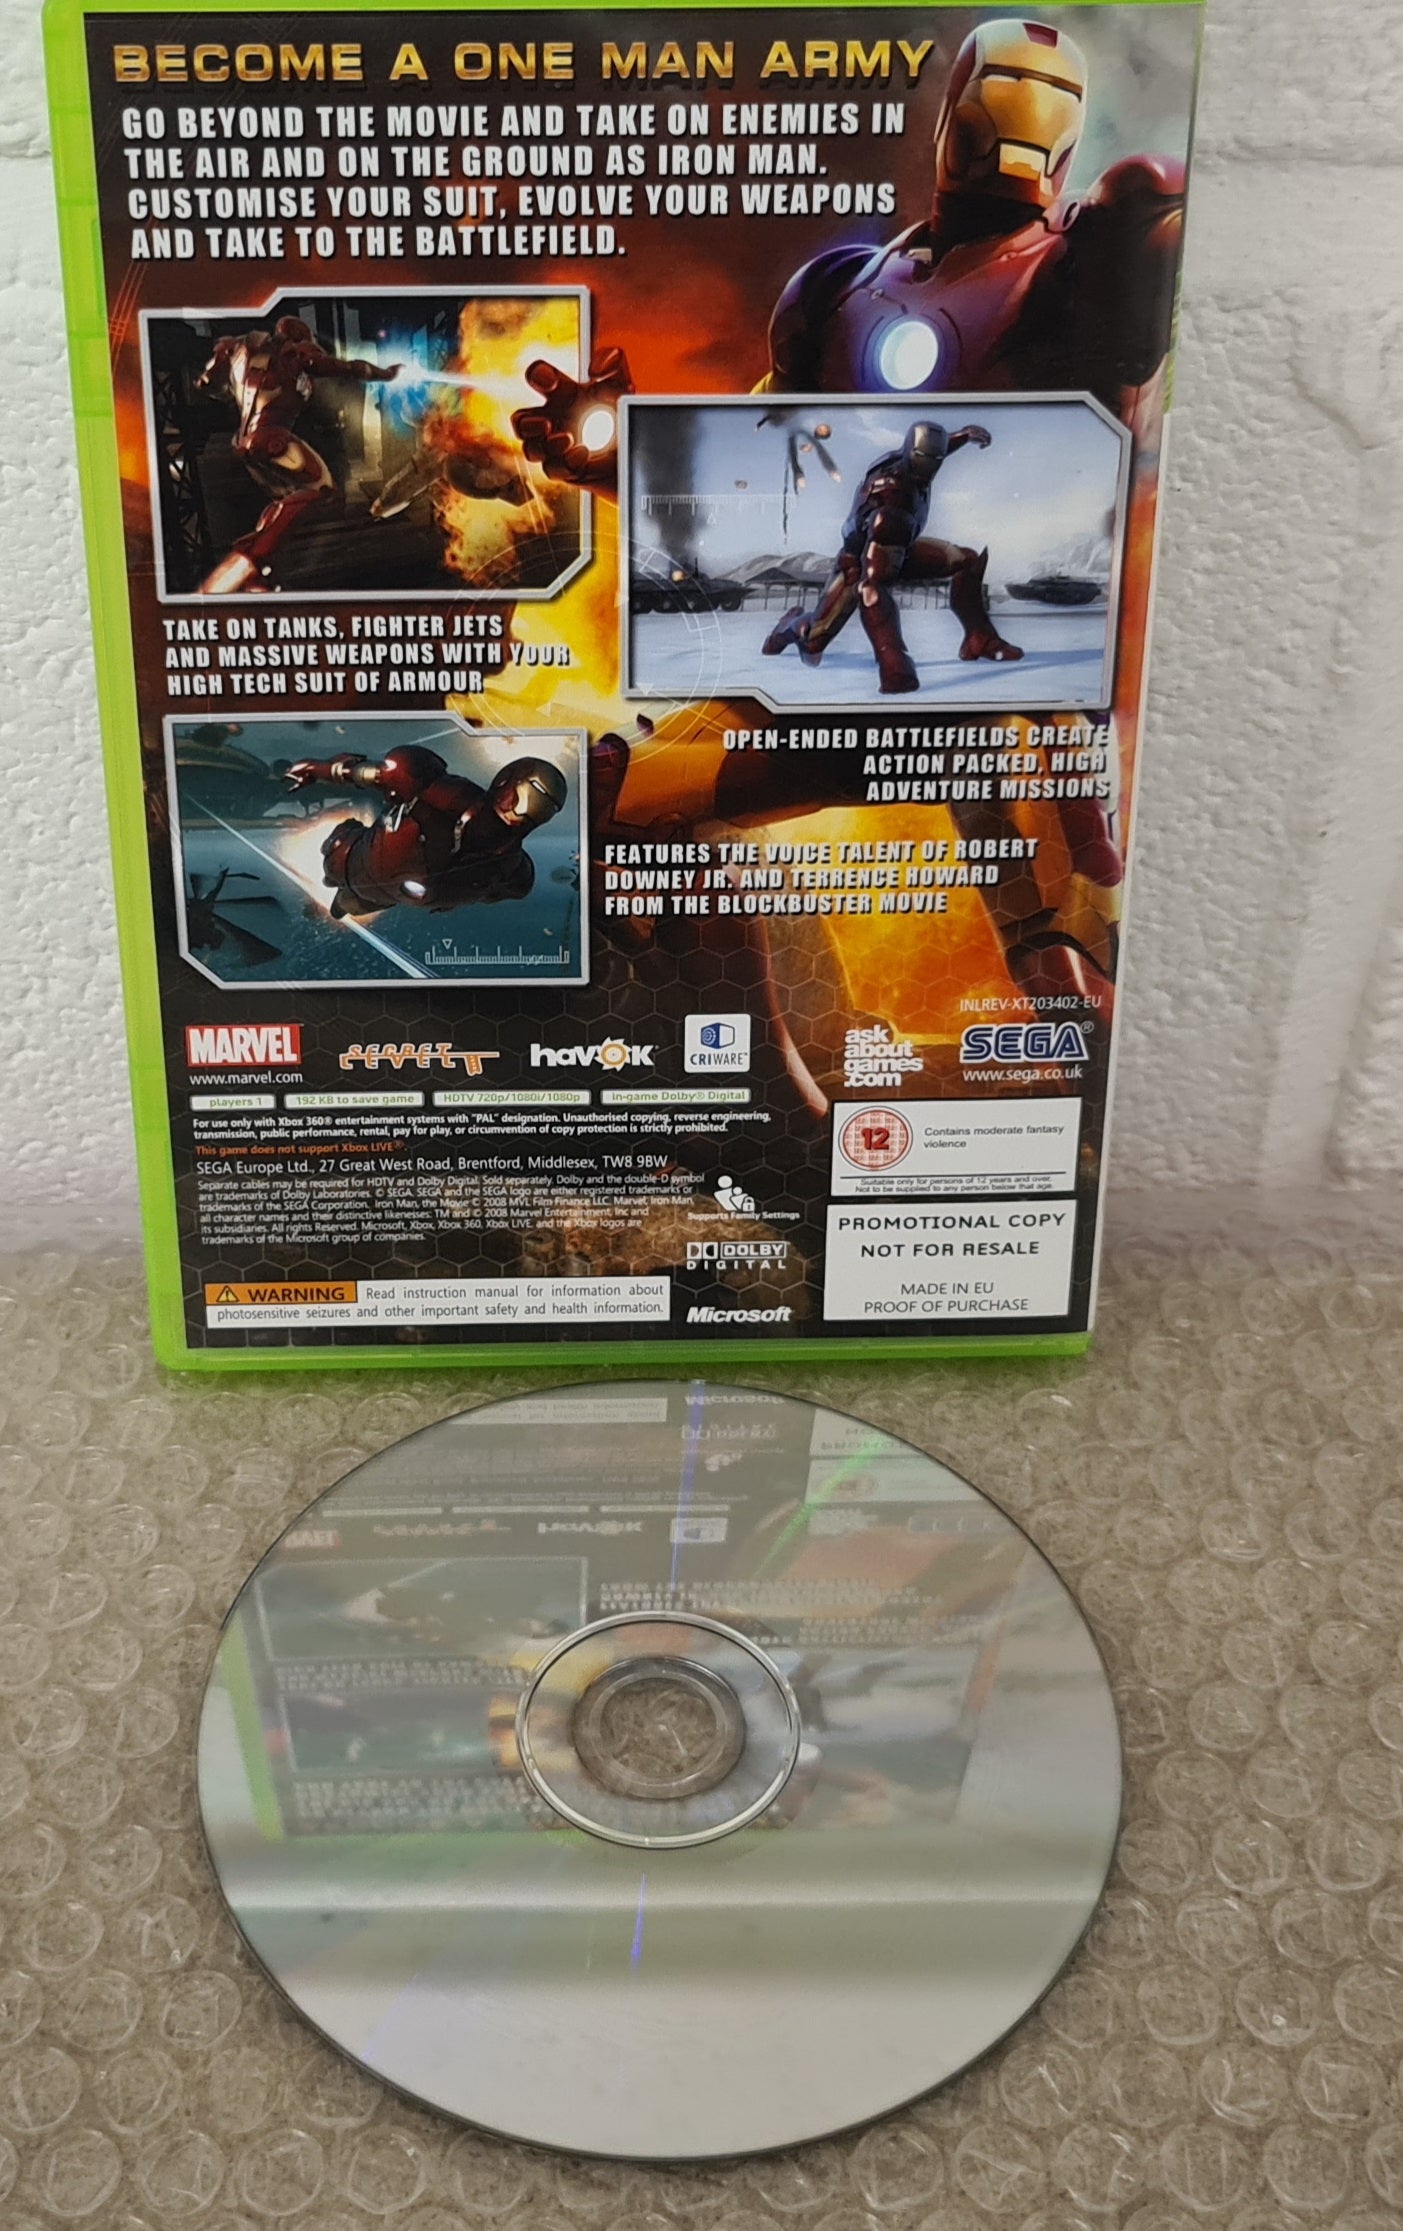 Iron Man RARE Promotional Copy Not For Resale Microsoft Xbox 360 Game